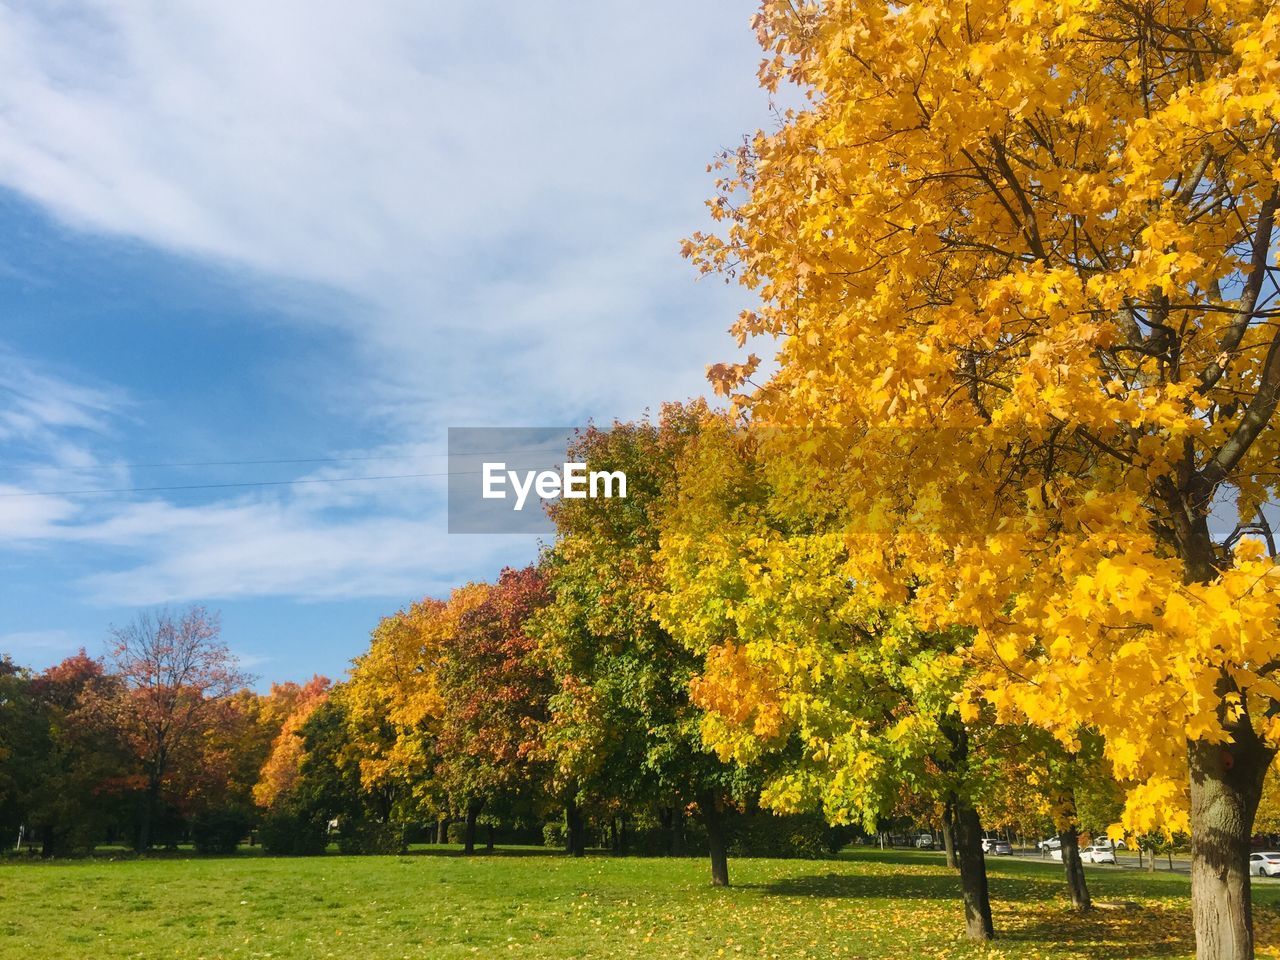 TREES GROWING IN PARK DURING AUTUMN AGAINST SKY